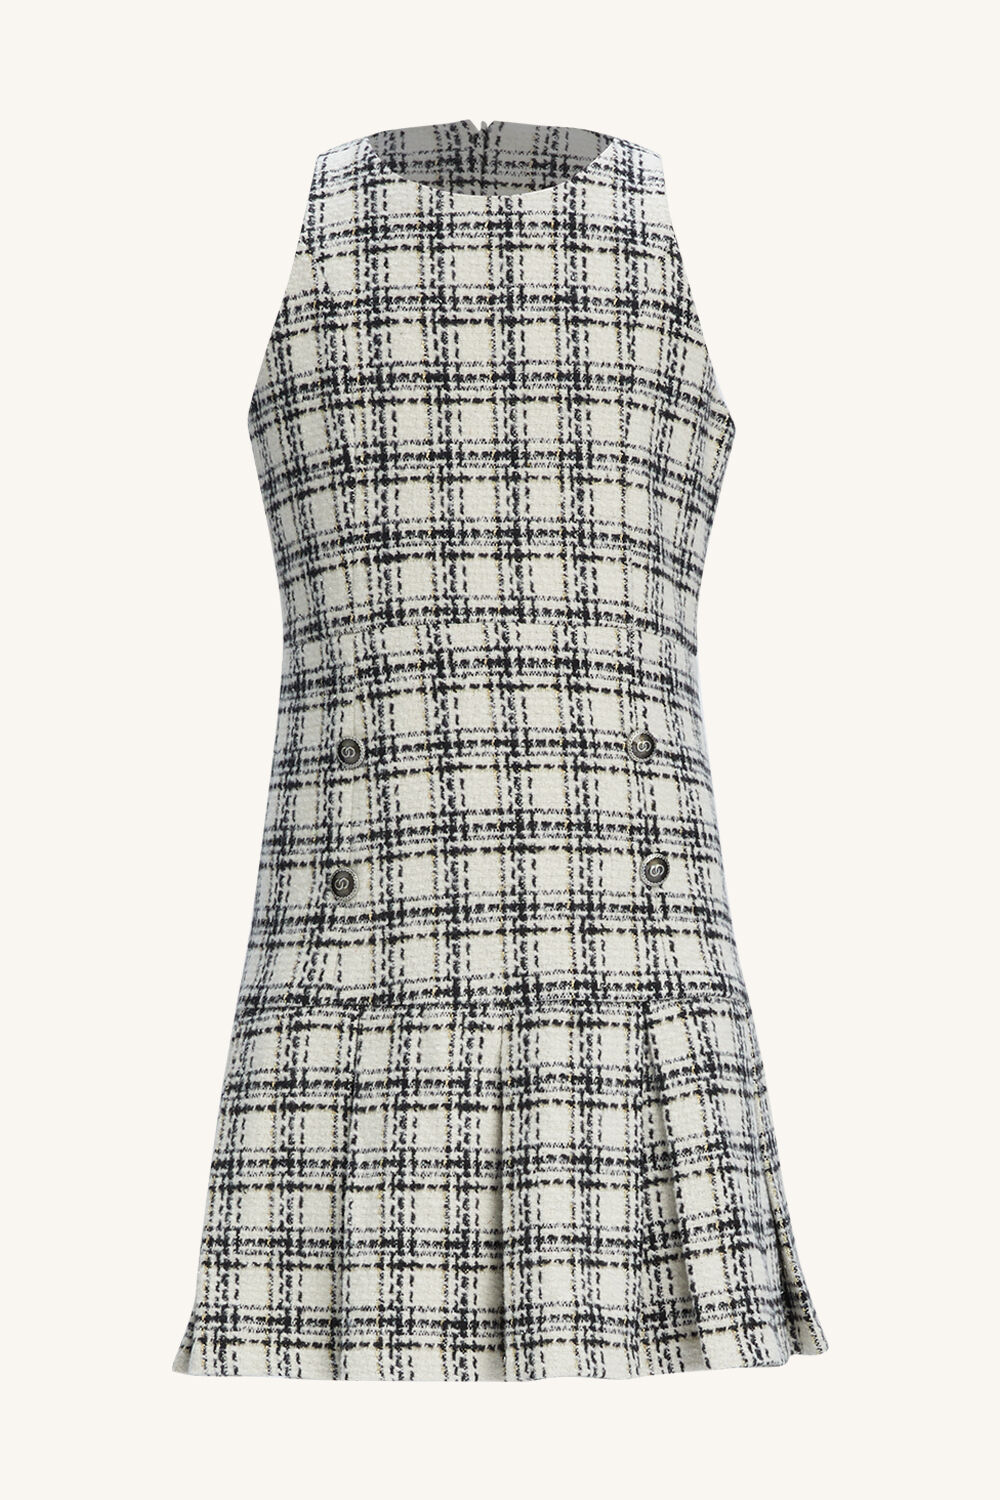 GIRLS MIAMI BOUCLE DRESS in colour GRAY VIOLET